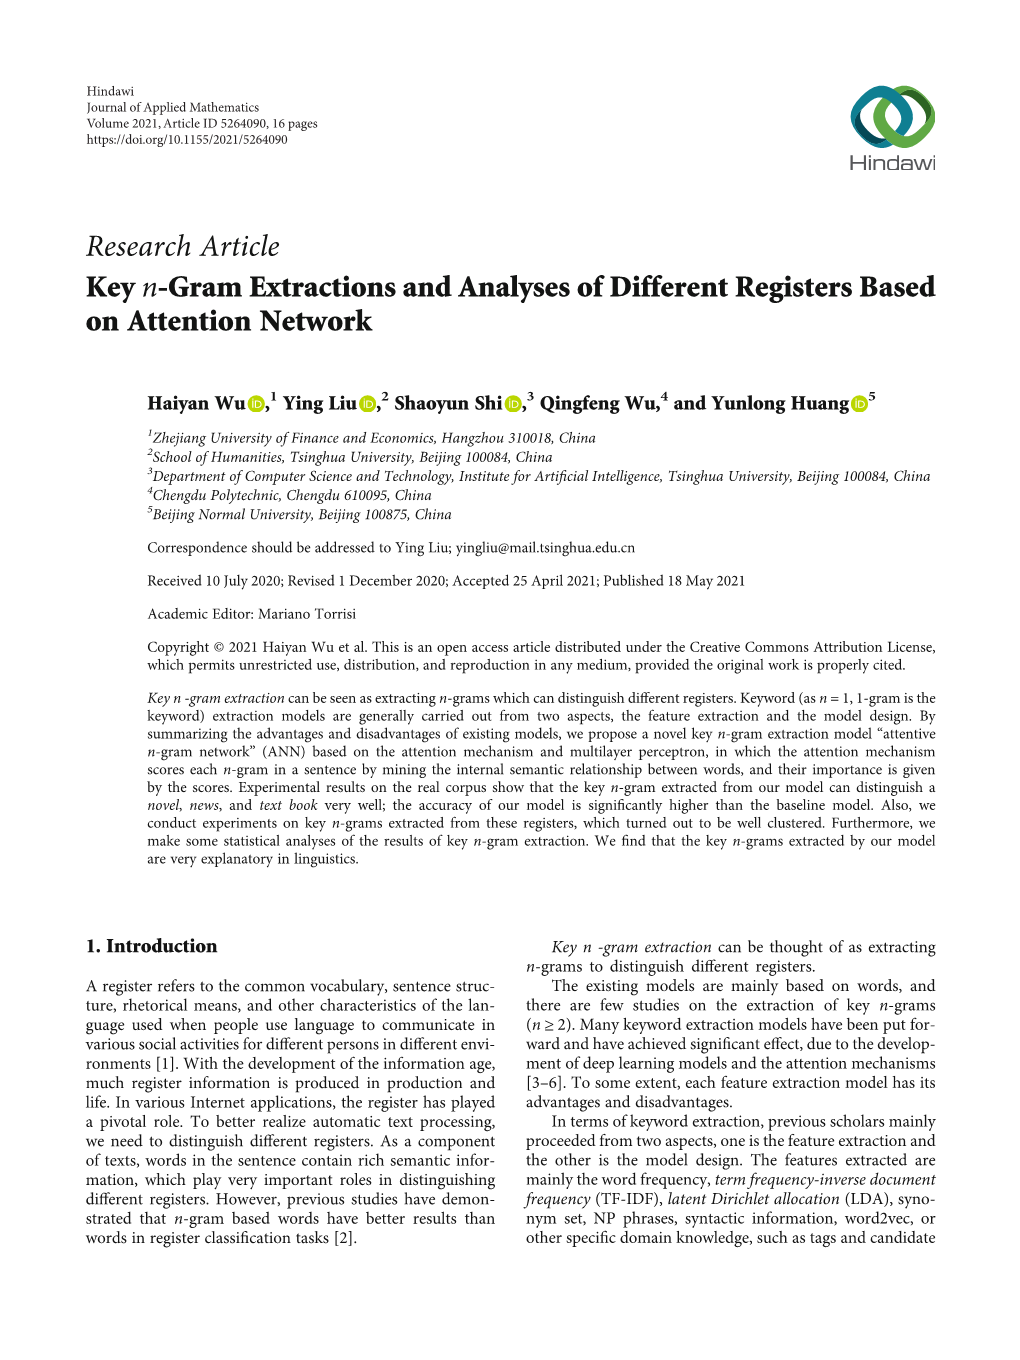 Research Article Key N-Gram Extractions and Analyses of Different Registers Based on Attention Network